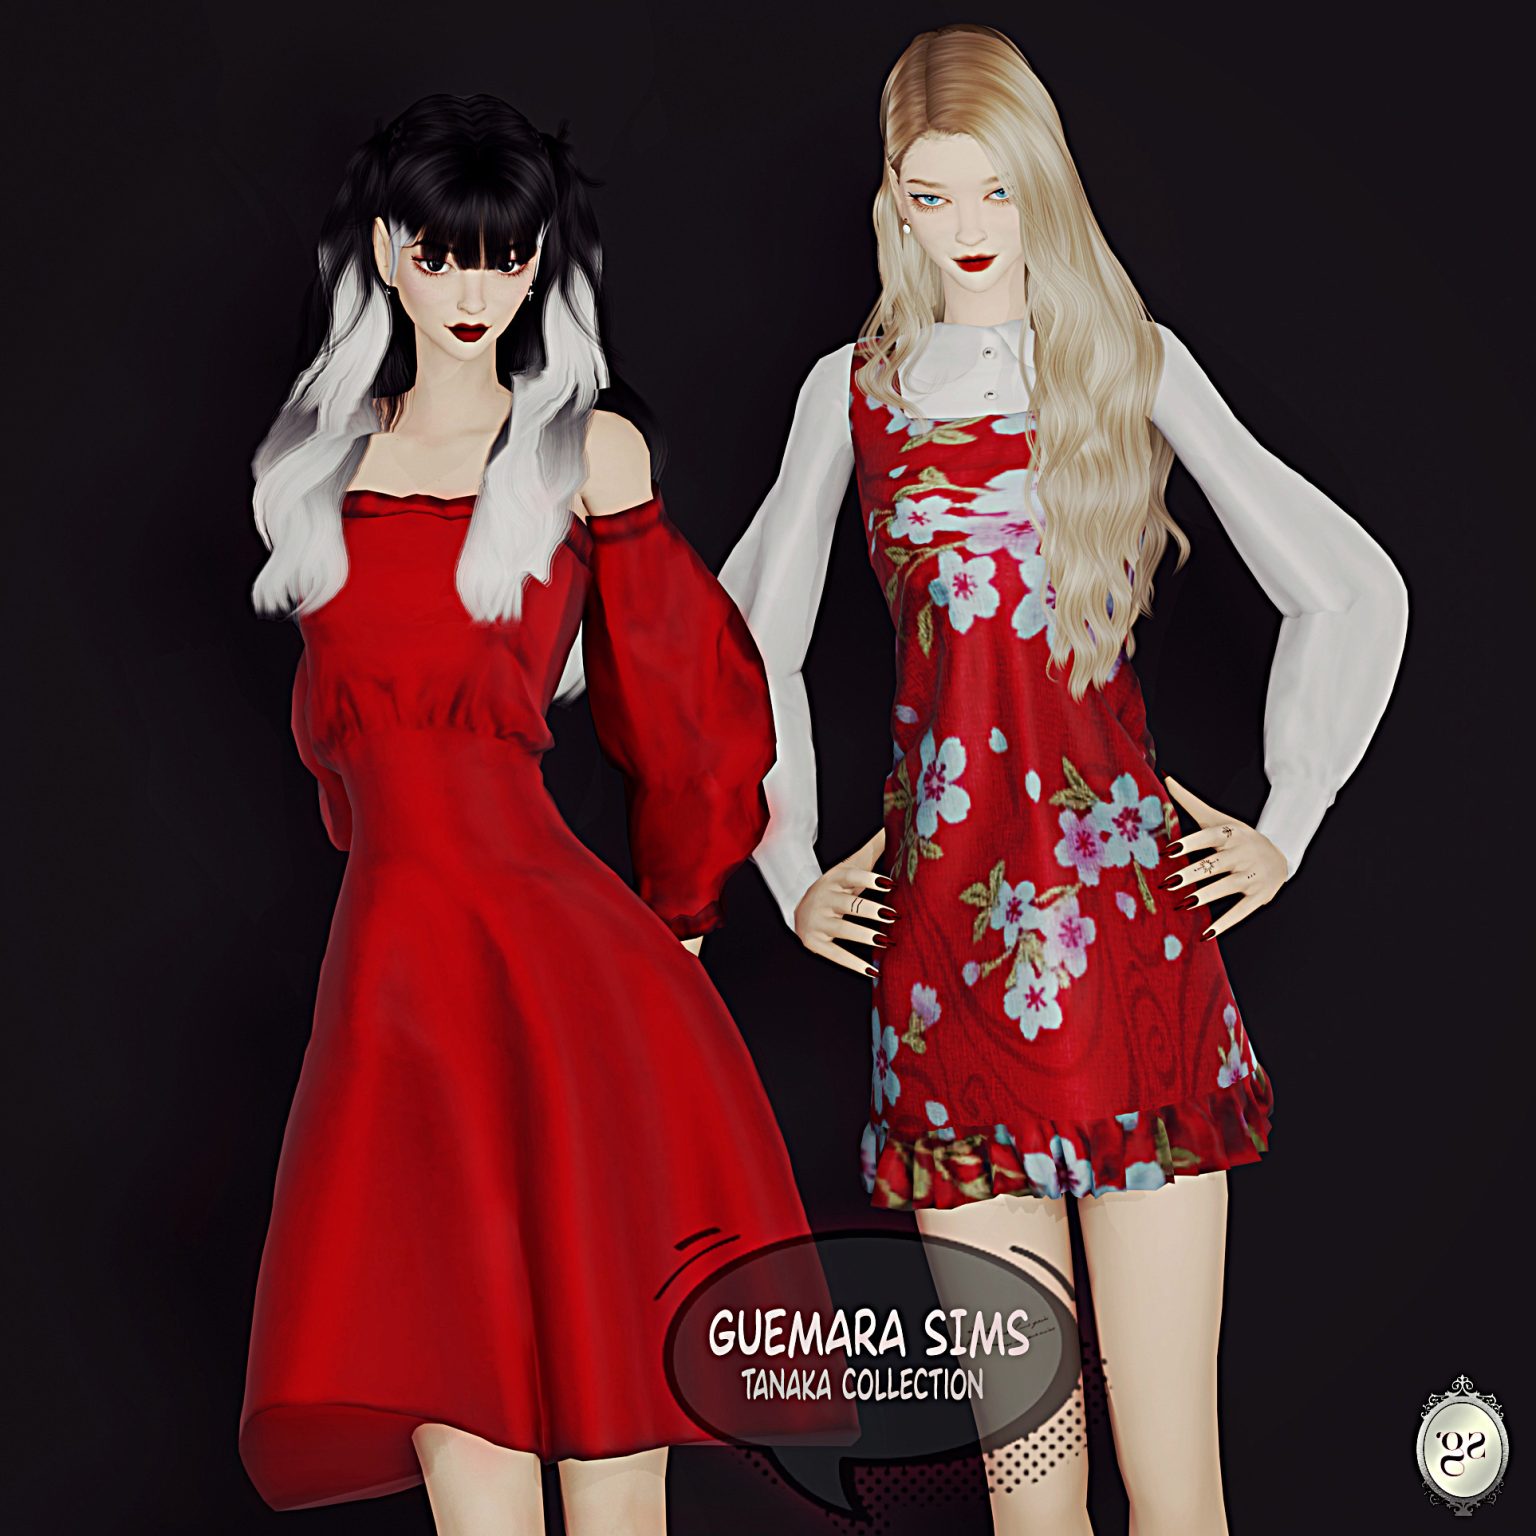 Tanaka collection (dresses and poses) - The Sims 4 Catalog